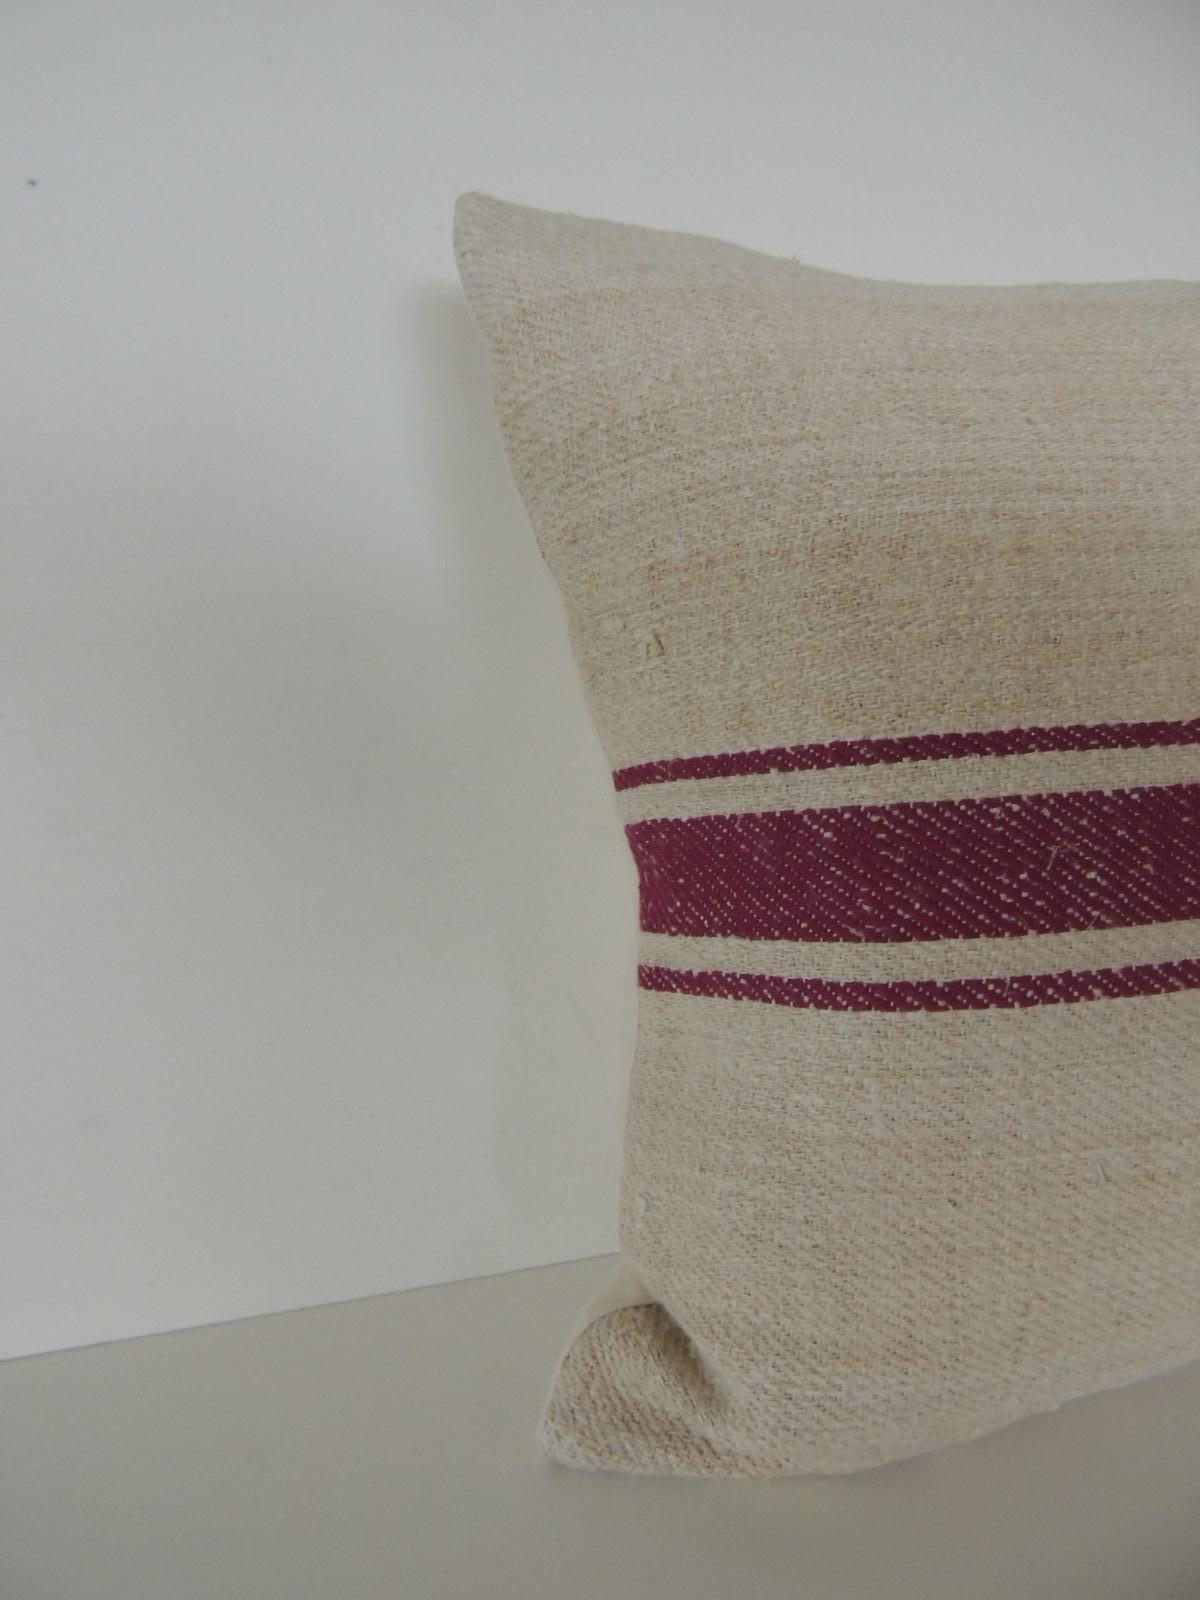 Natural and purple stripe woven decorative pillow.
French grain sack front and natural linen backing.
Decorative pillow handcrafted and designed in the USA.
Closure by stitch (no zipper closure) with custom-made pillow insert.
Size: 19 x 19 x 6.